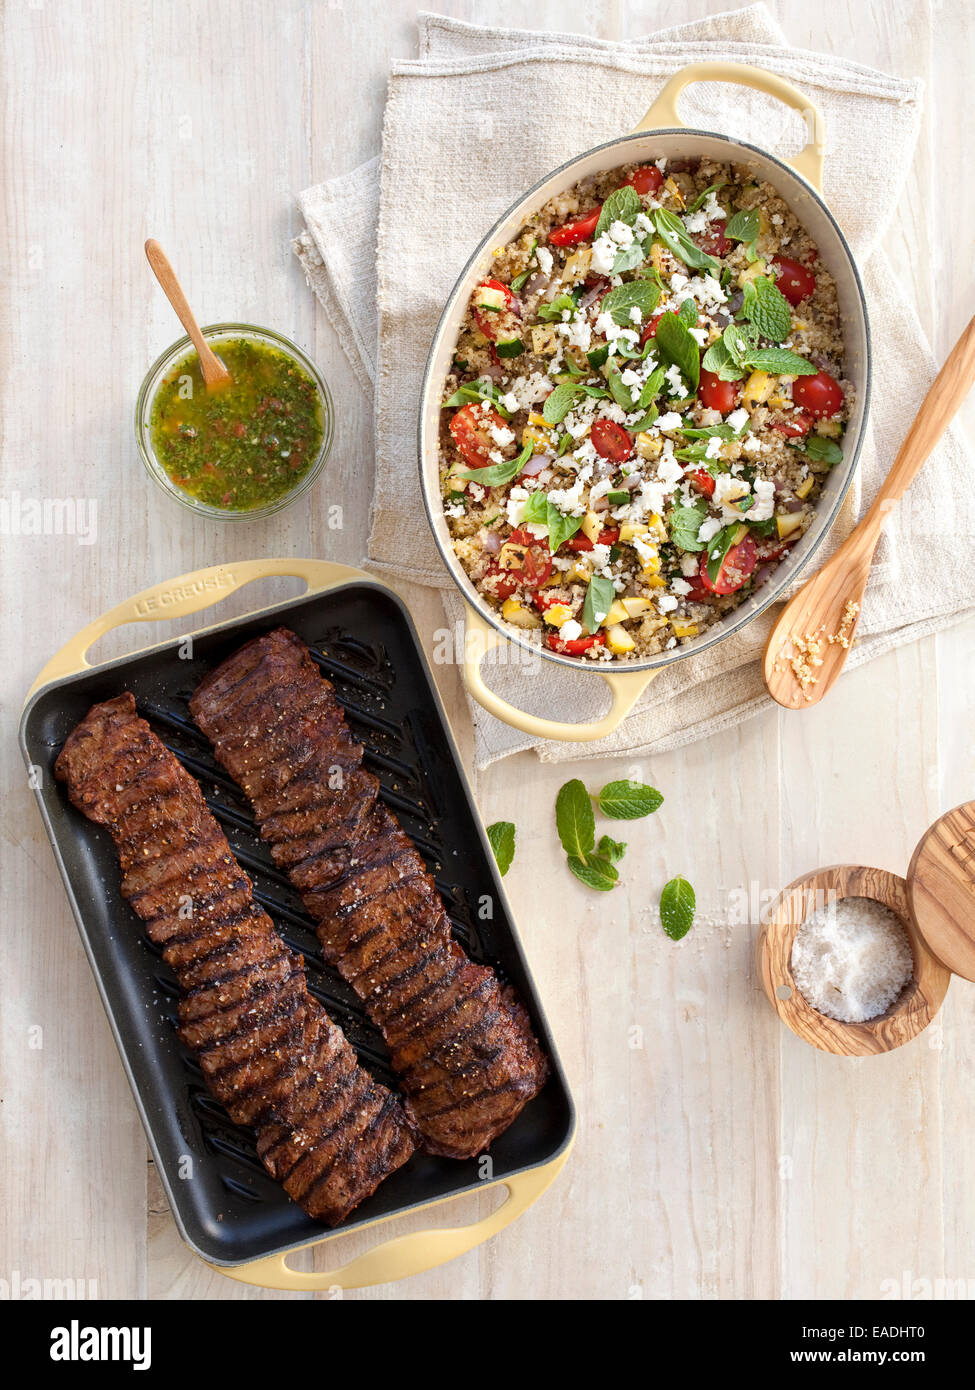 Grilled skirt steak and couscous on table Stock Photo